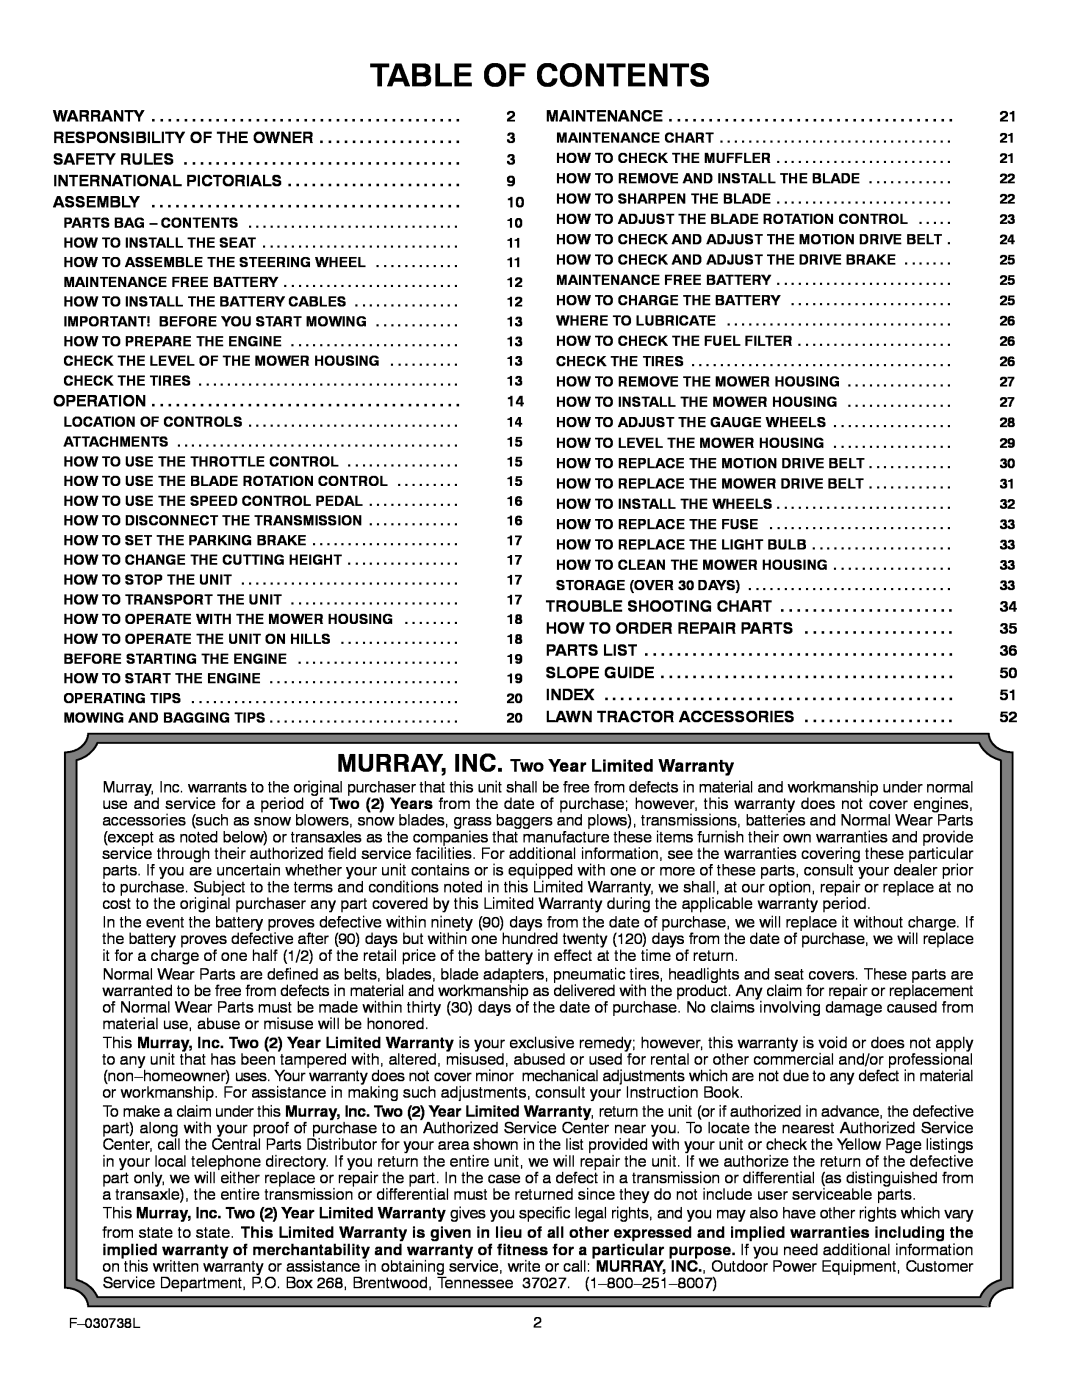 Murray 425603x99A manual Table Of Contents, MURRAY, INC. Two Year Limited Warranty 